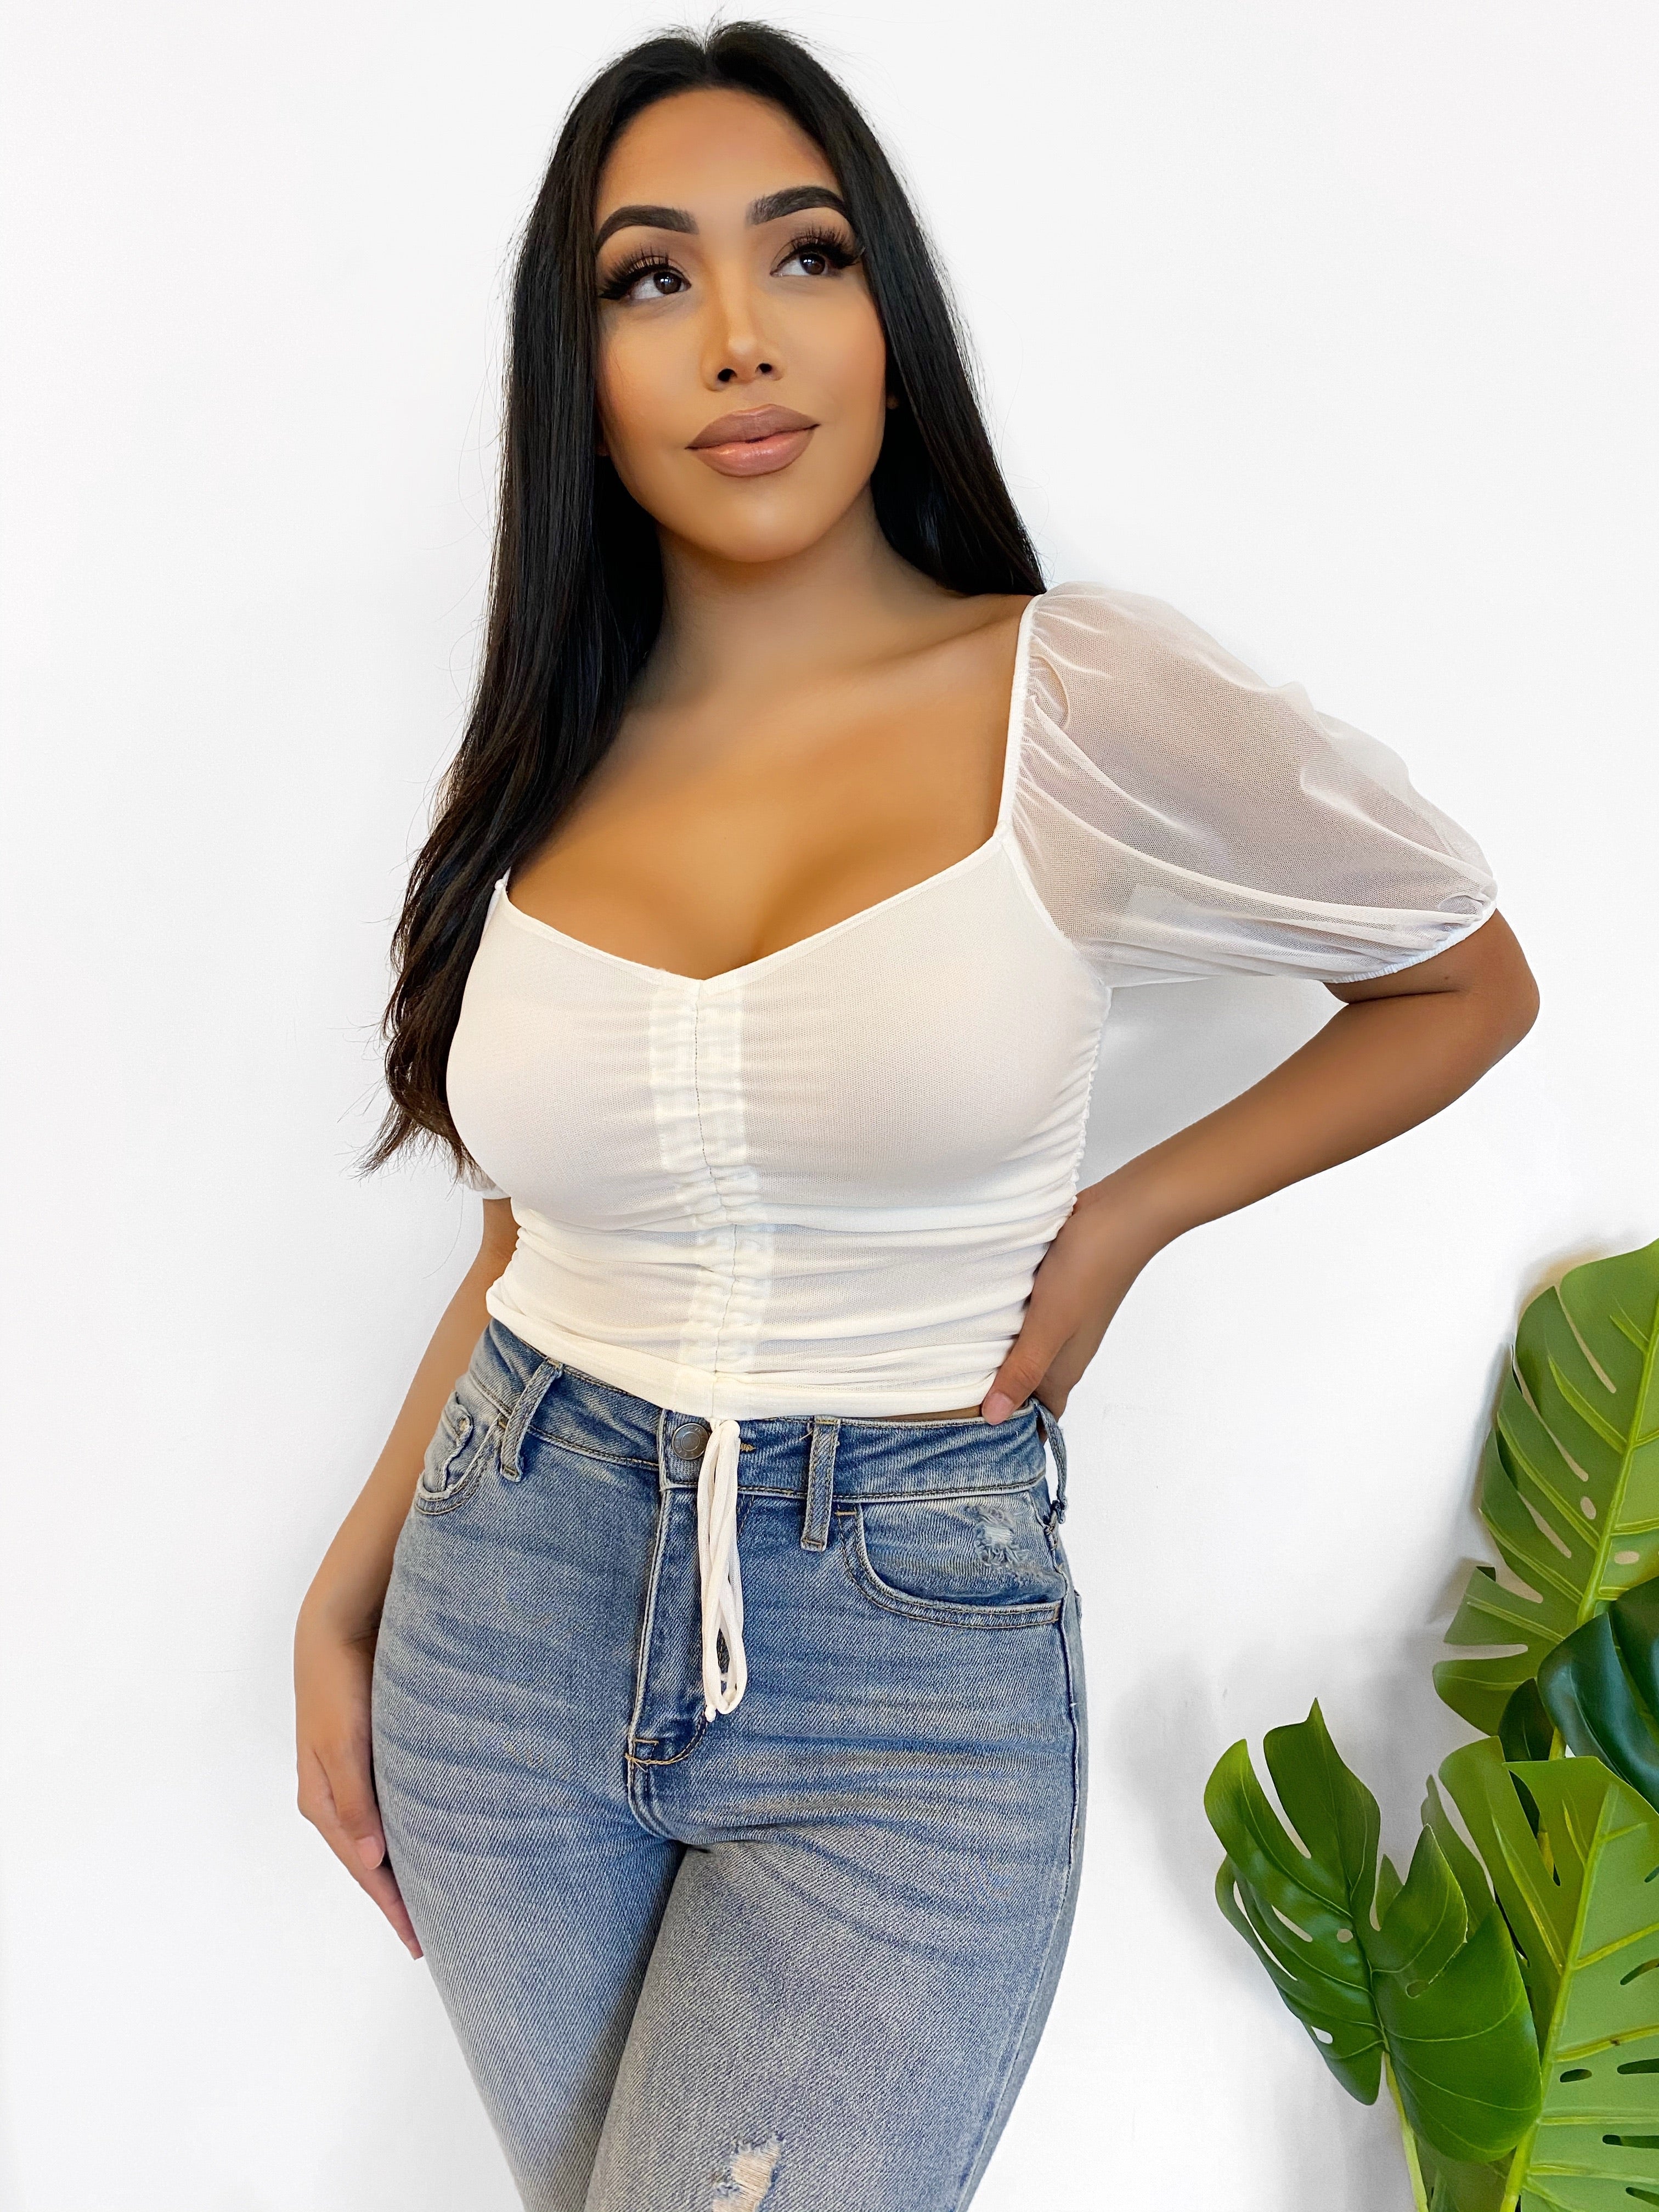 mesh top with jeans